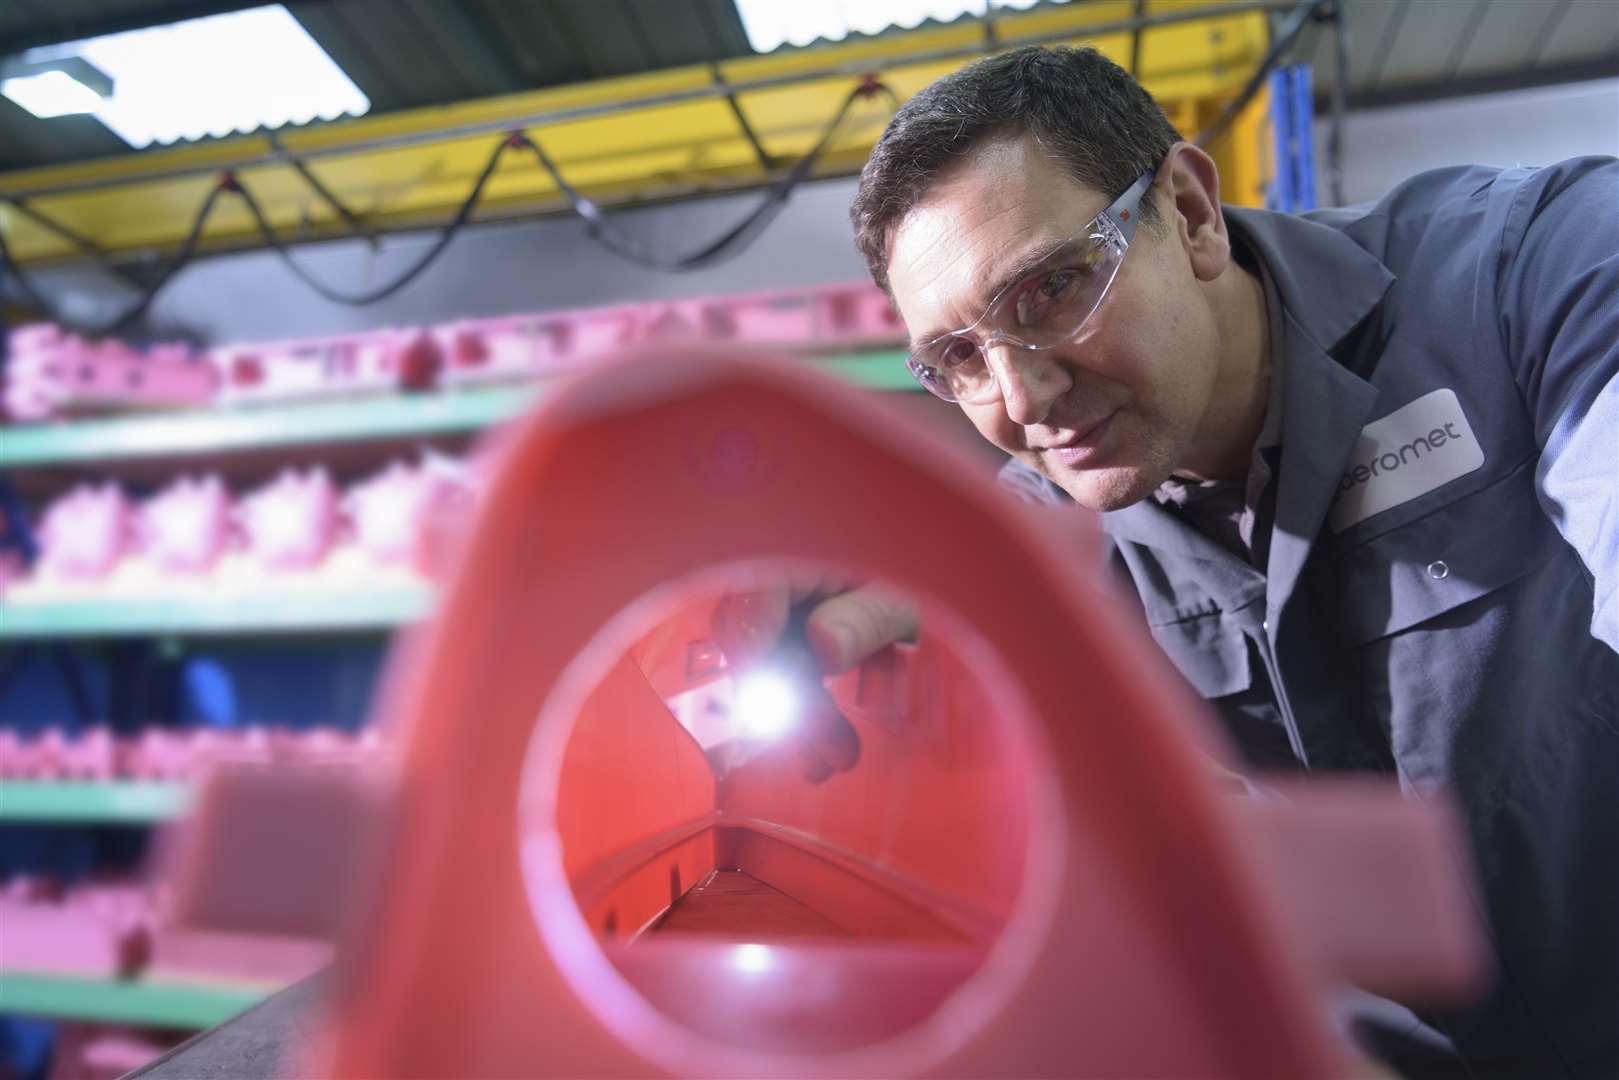 Aeromet makes parts for the aerospace industry